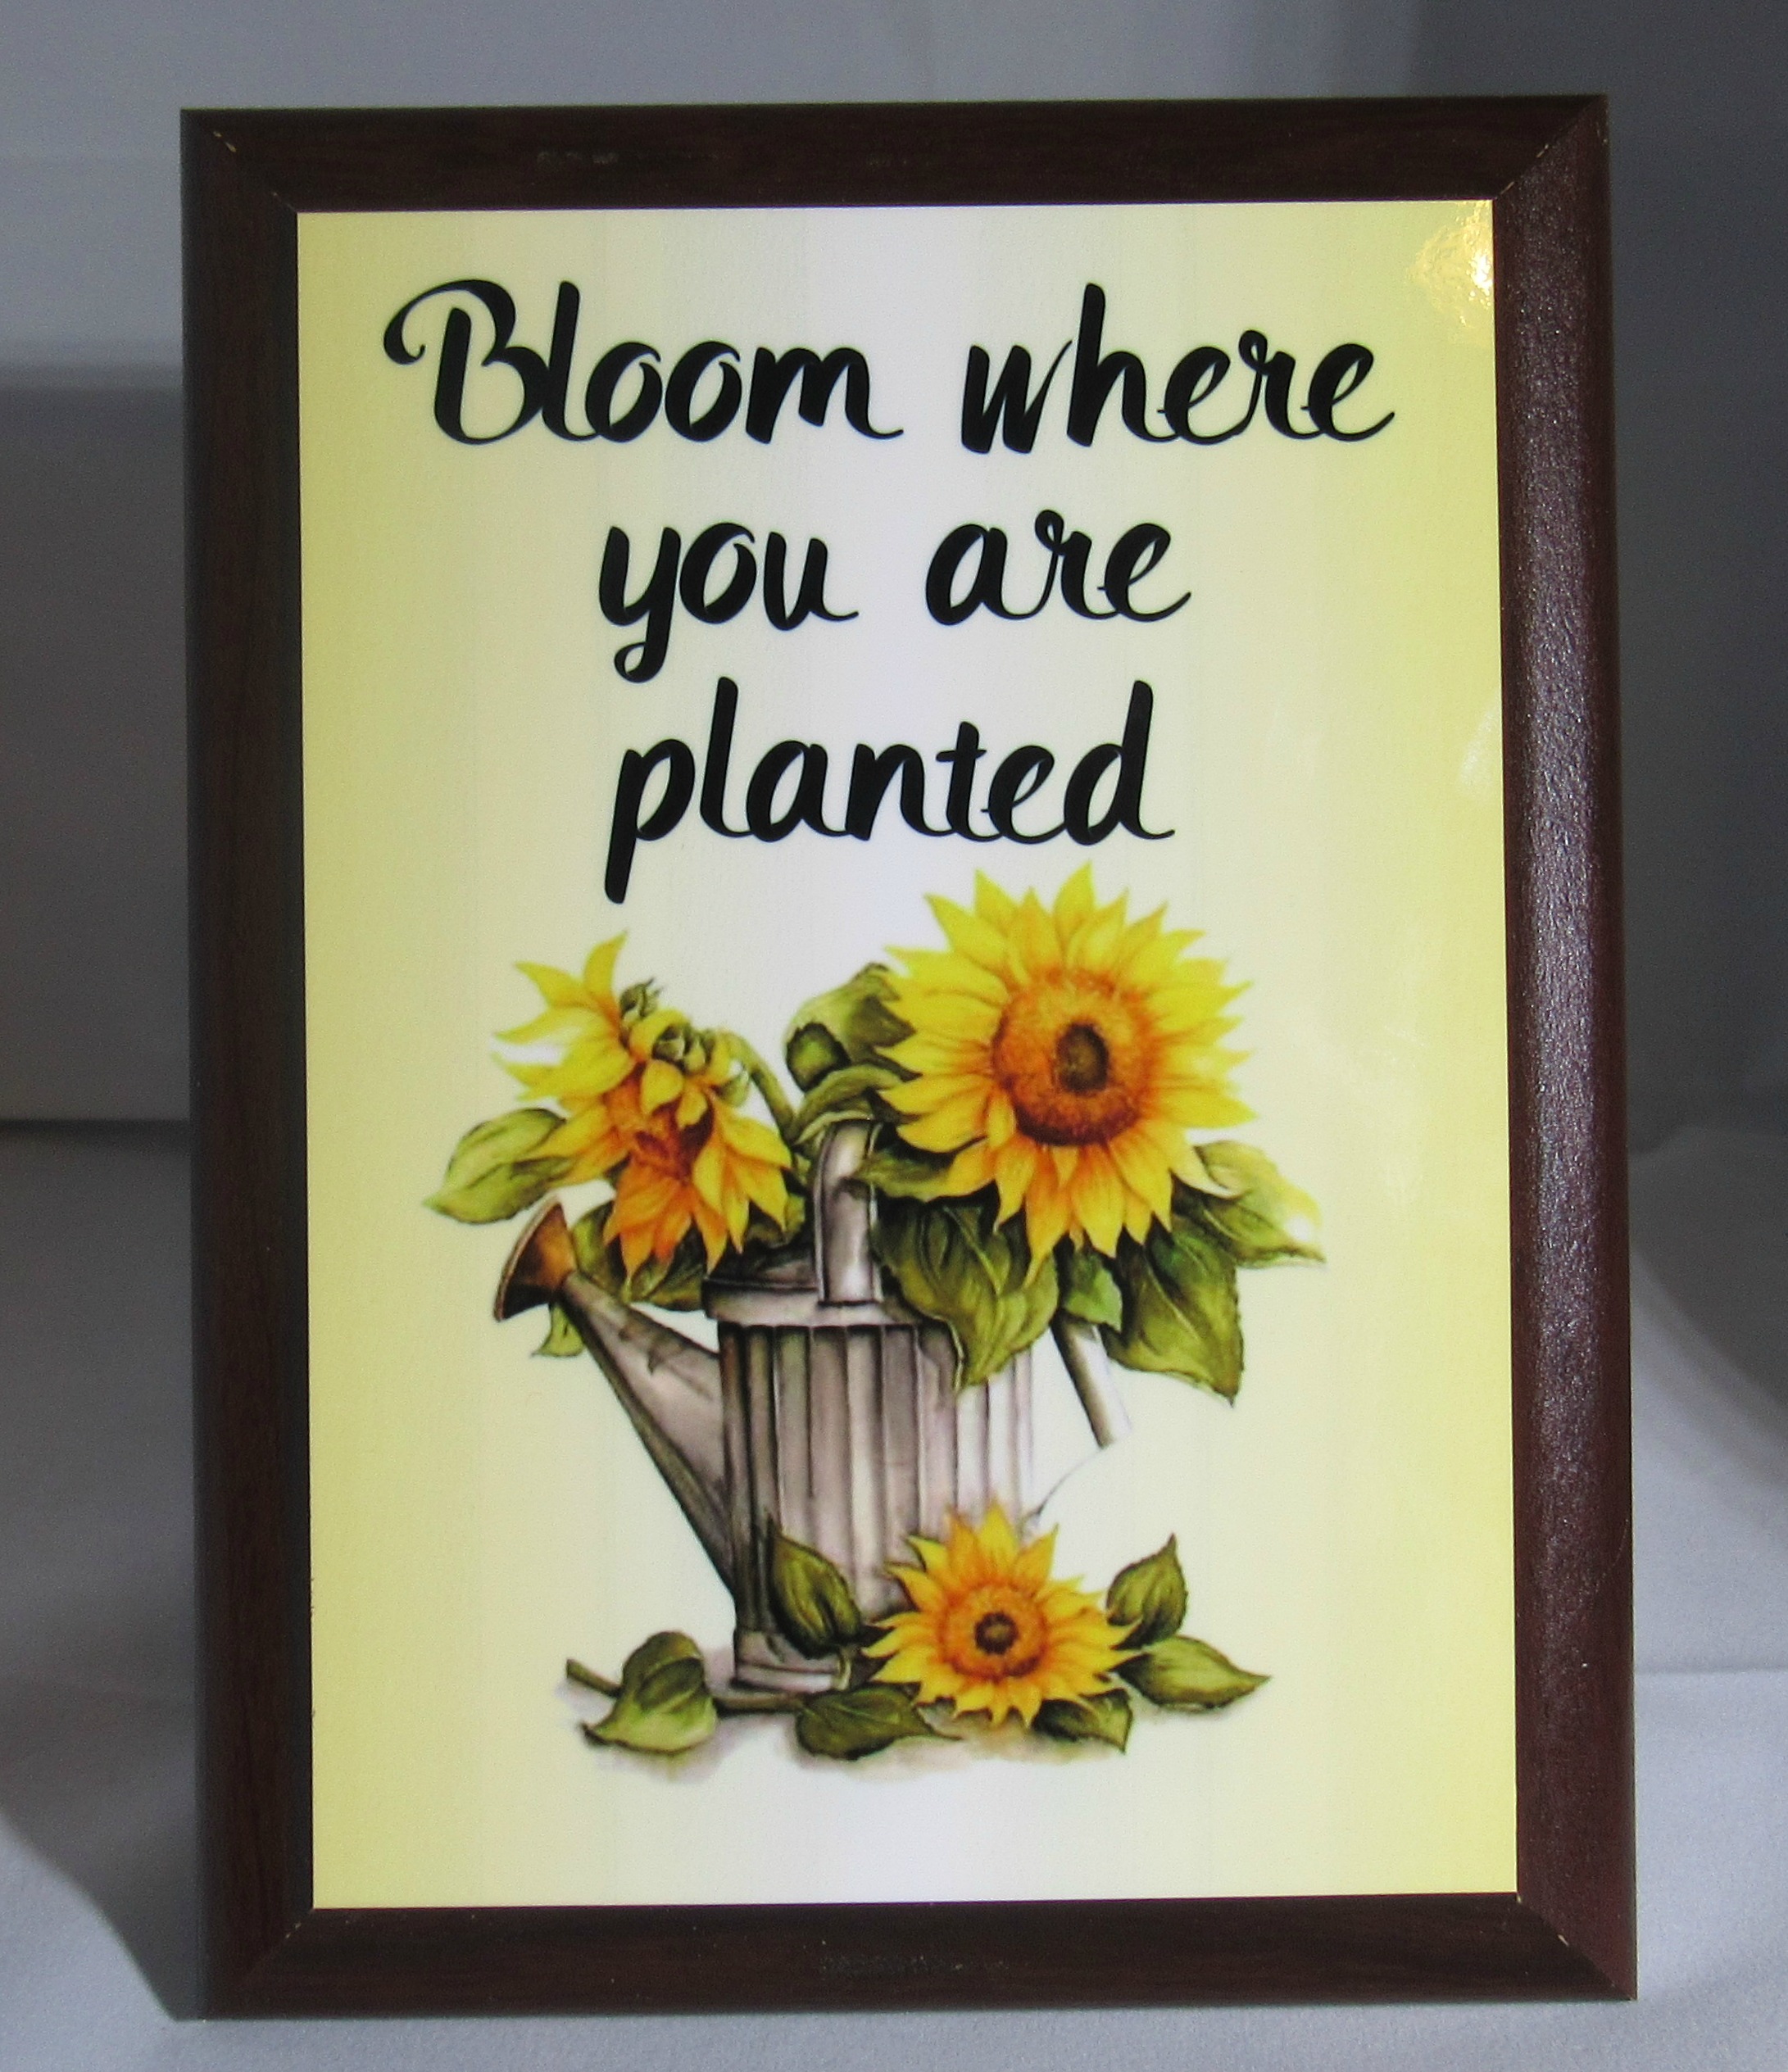 Blooming made with sublimation printing